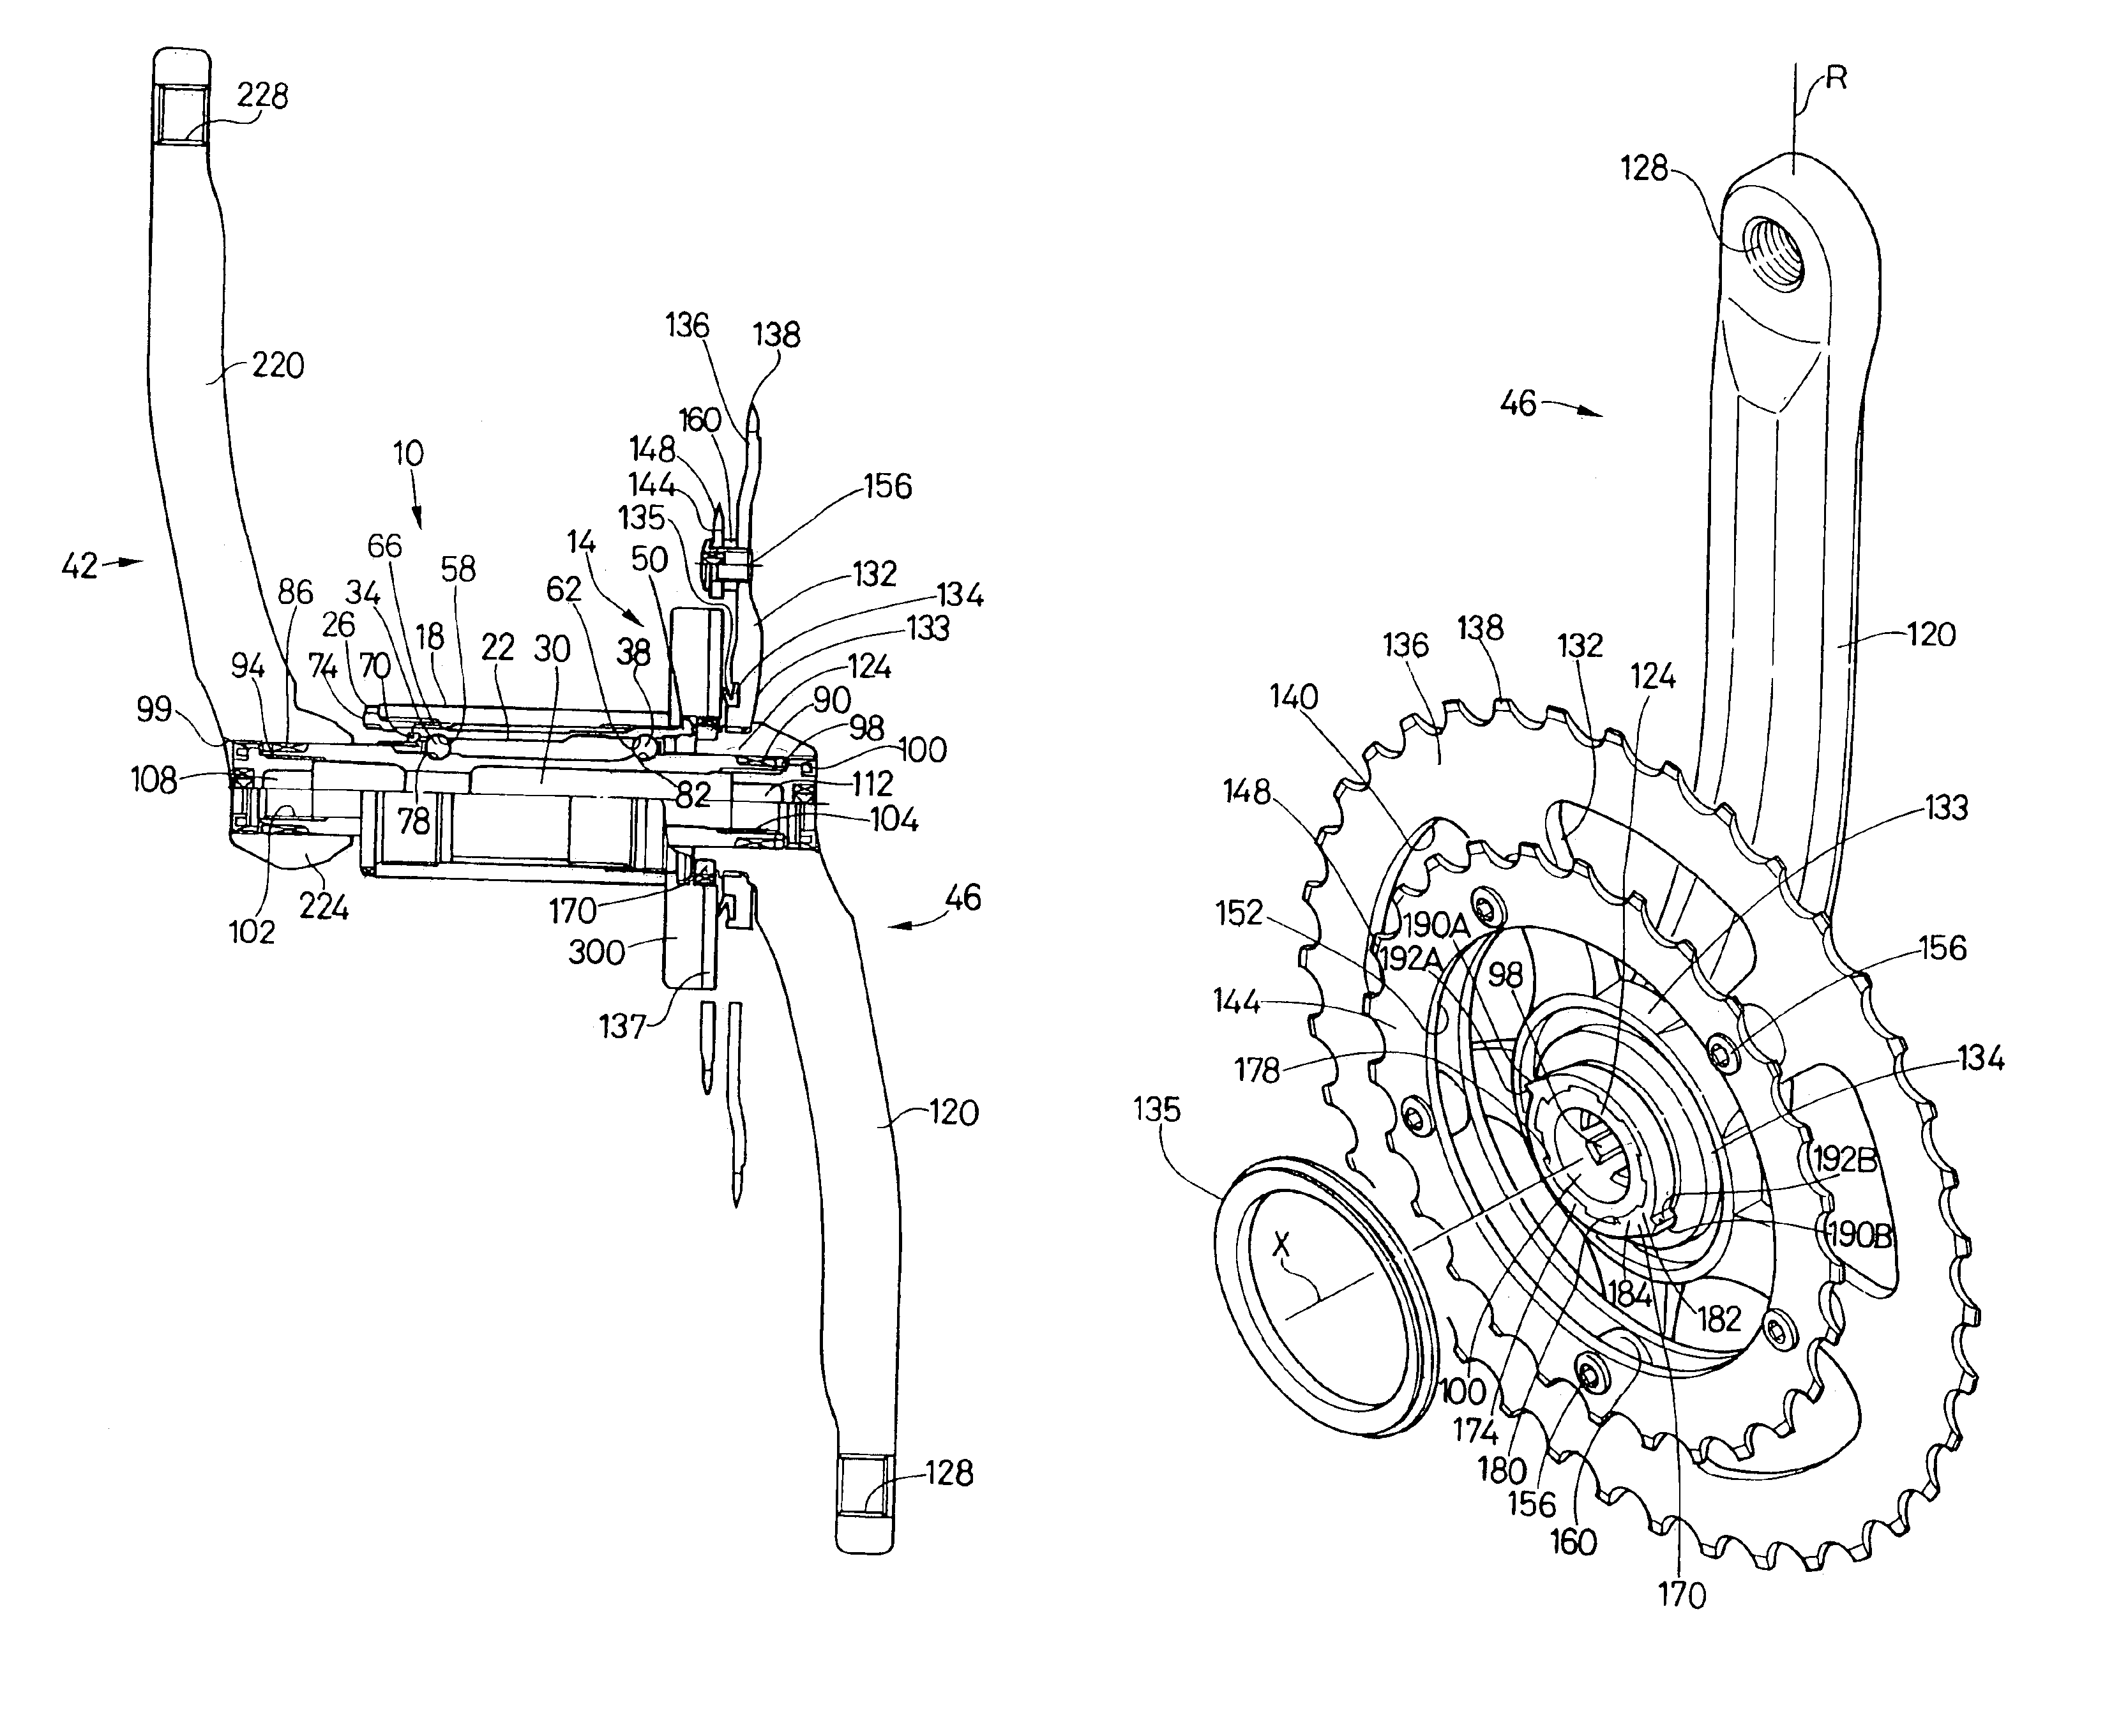 Drive mechanism for a bicycle transmission assist mechanism